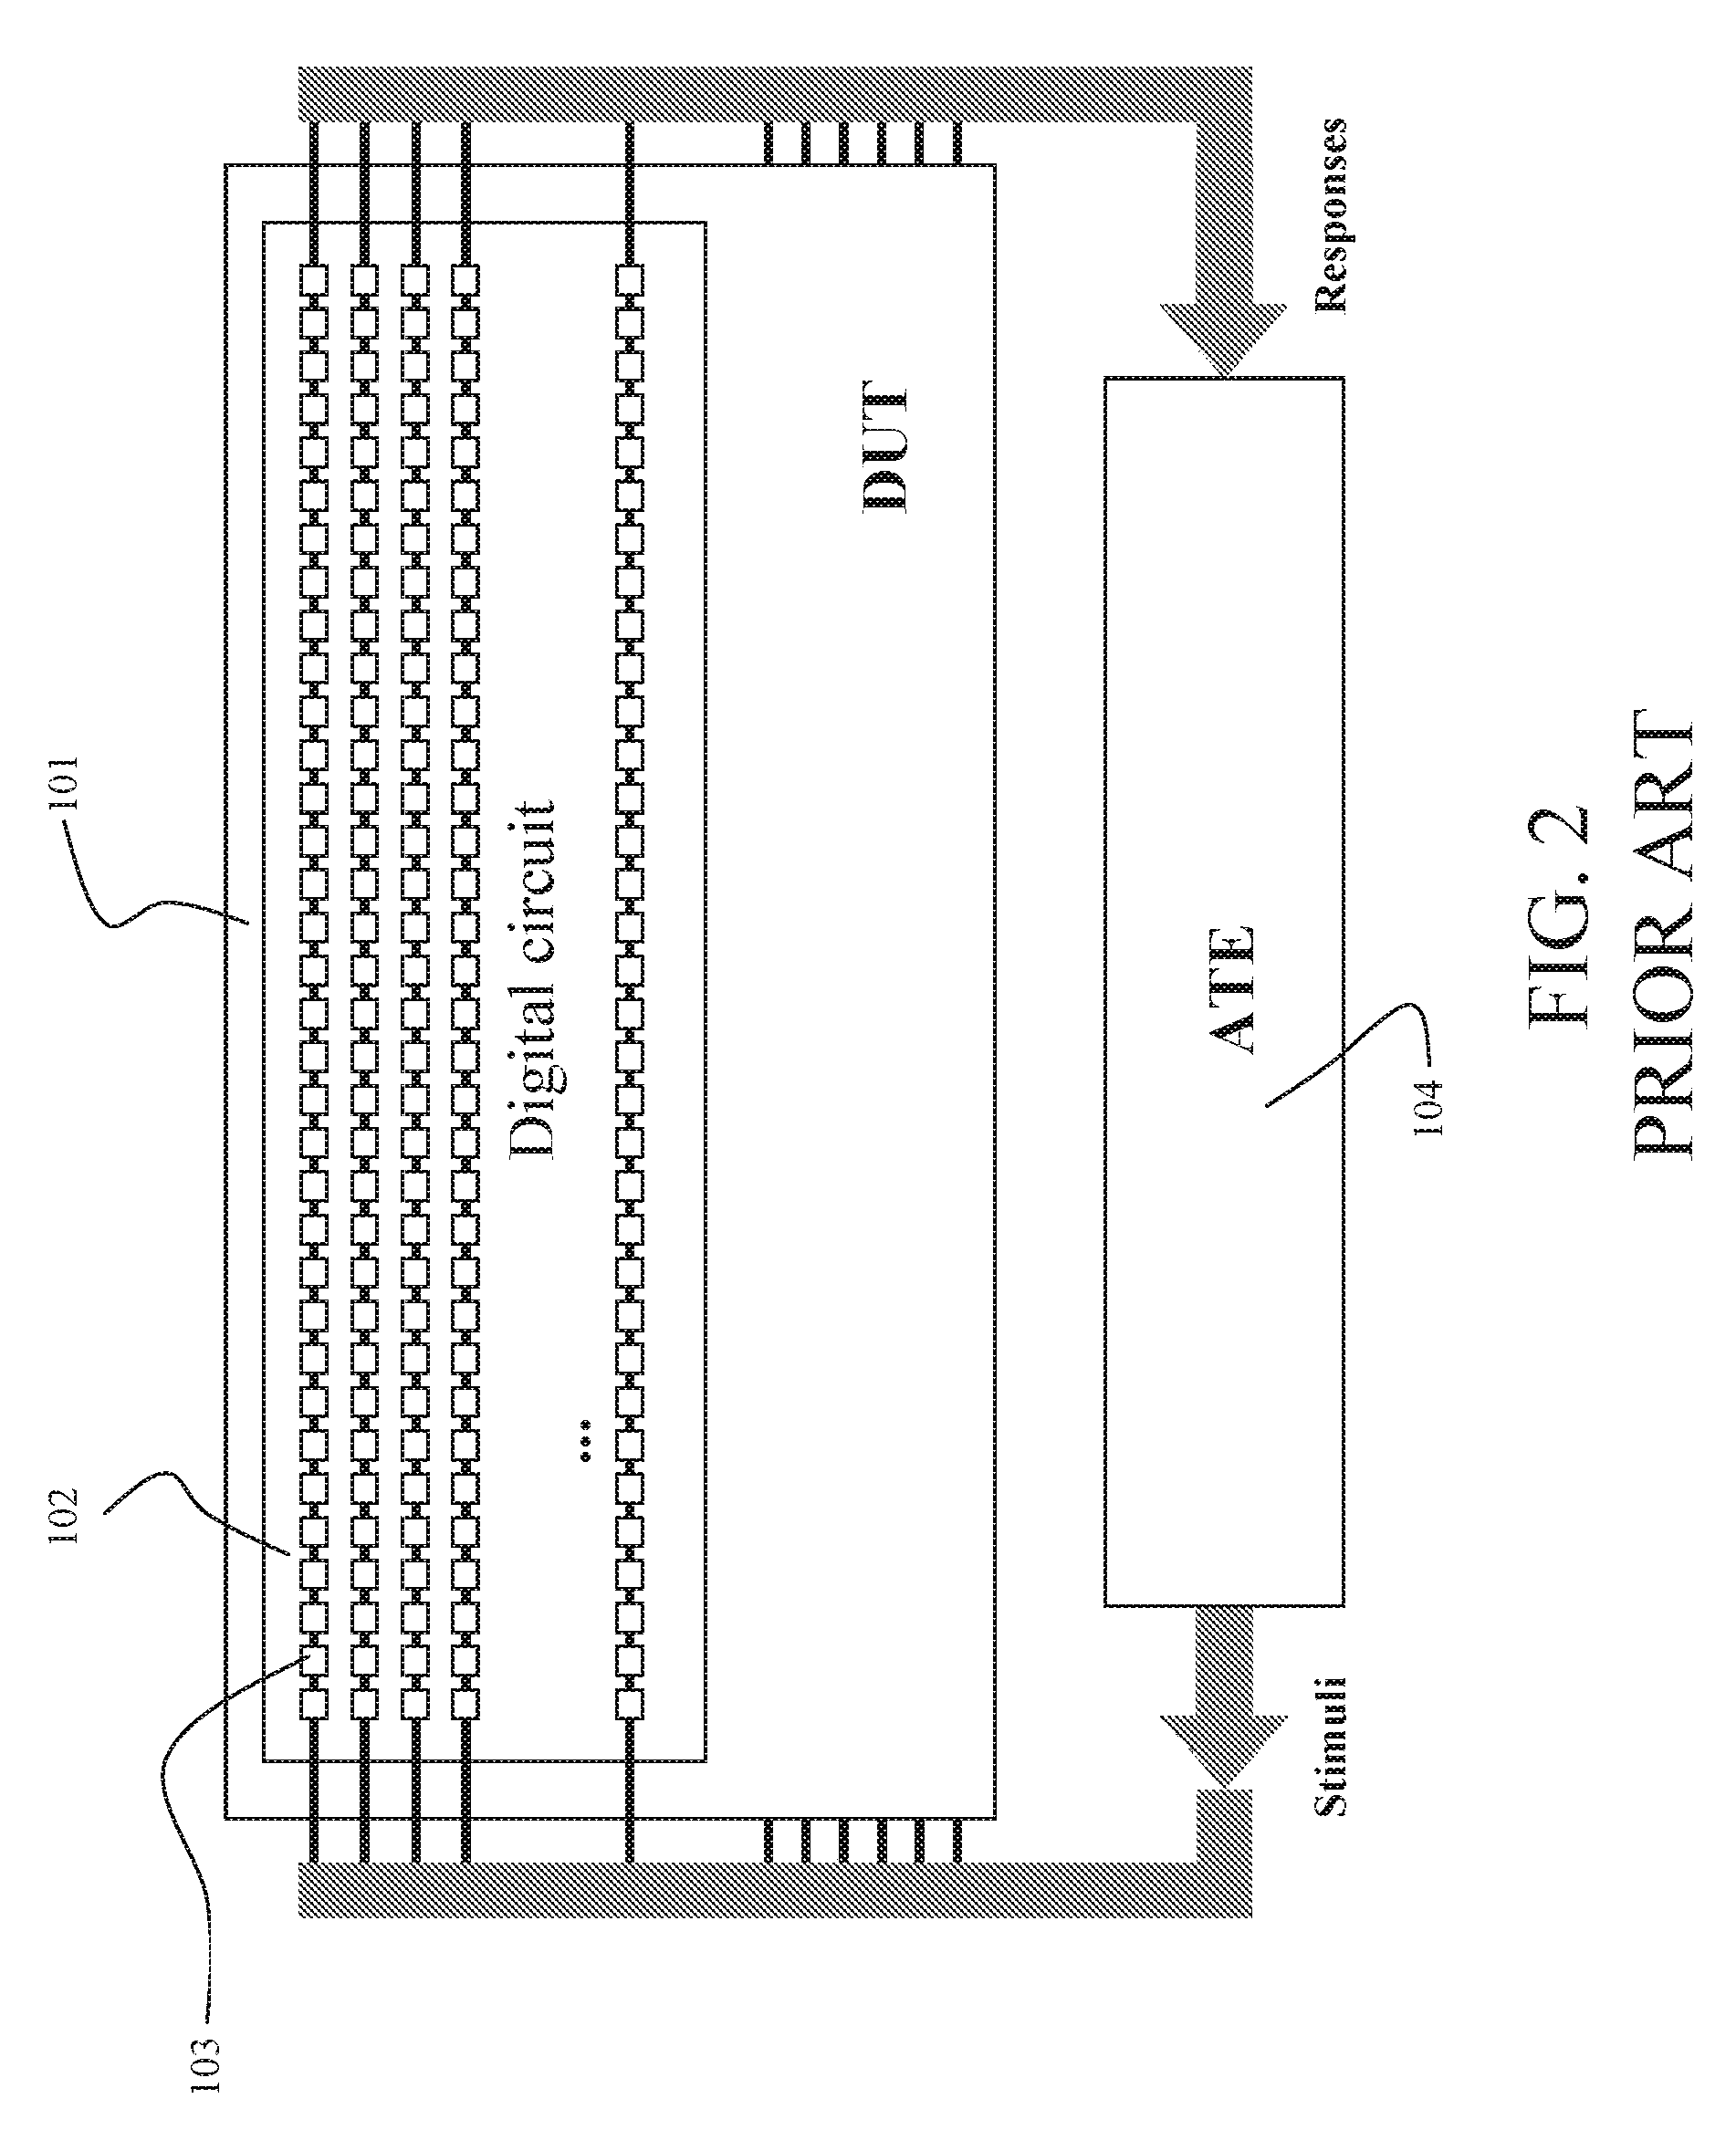 Process for making an electric testing of electronic devices